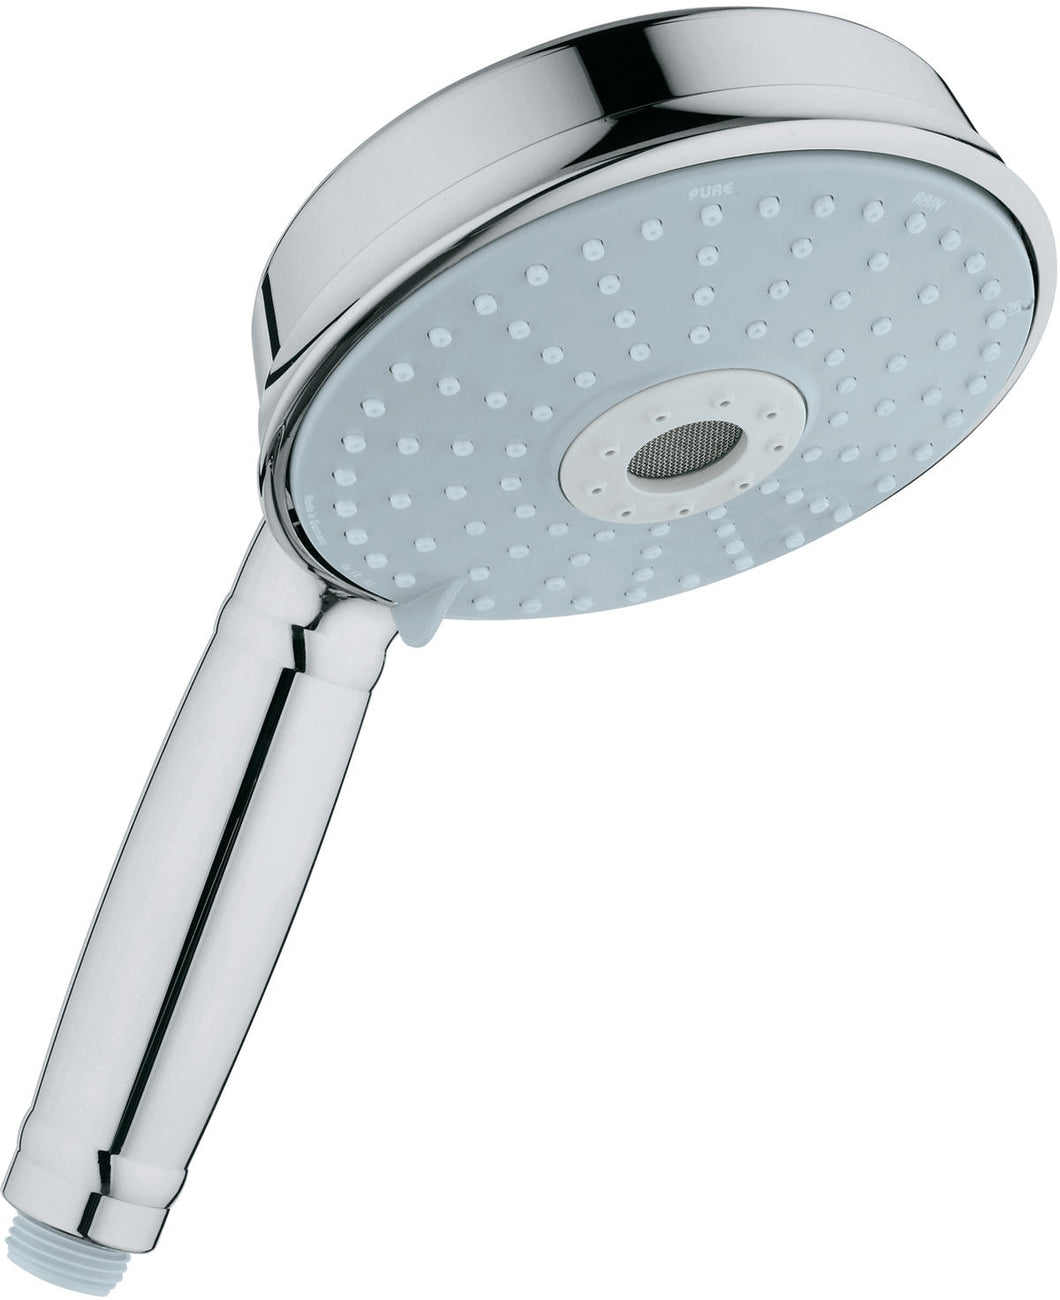 Grohe 27129 Rainshower Rustic Multi-Function Handshower Three Spray with Speed Clean Technology